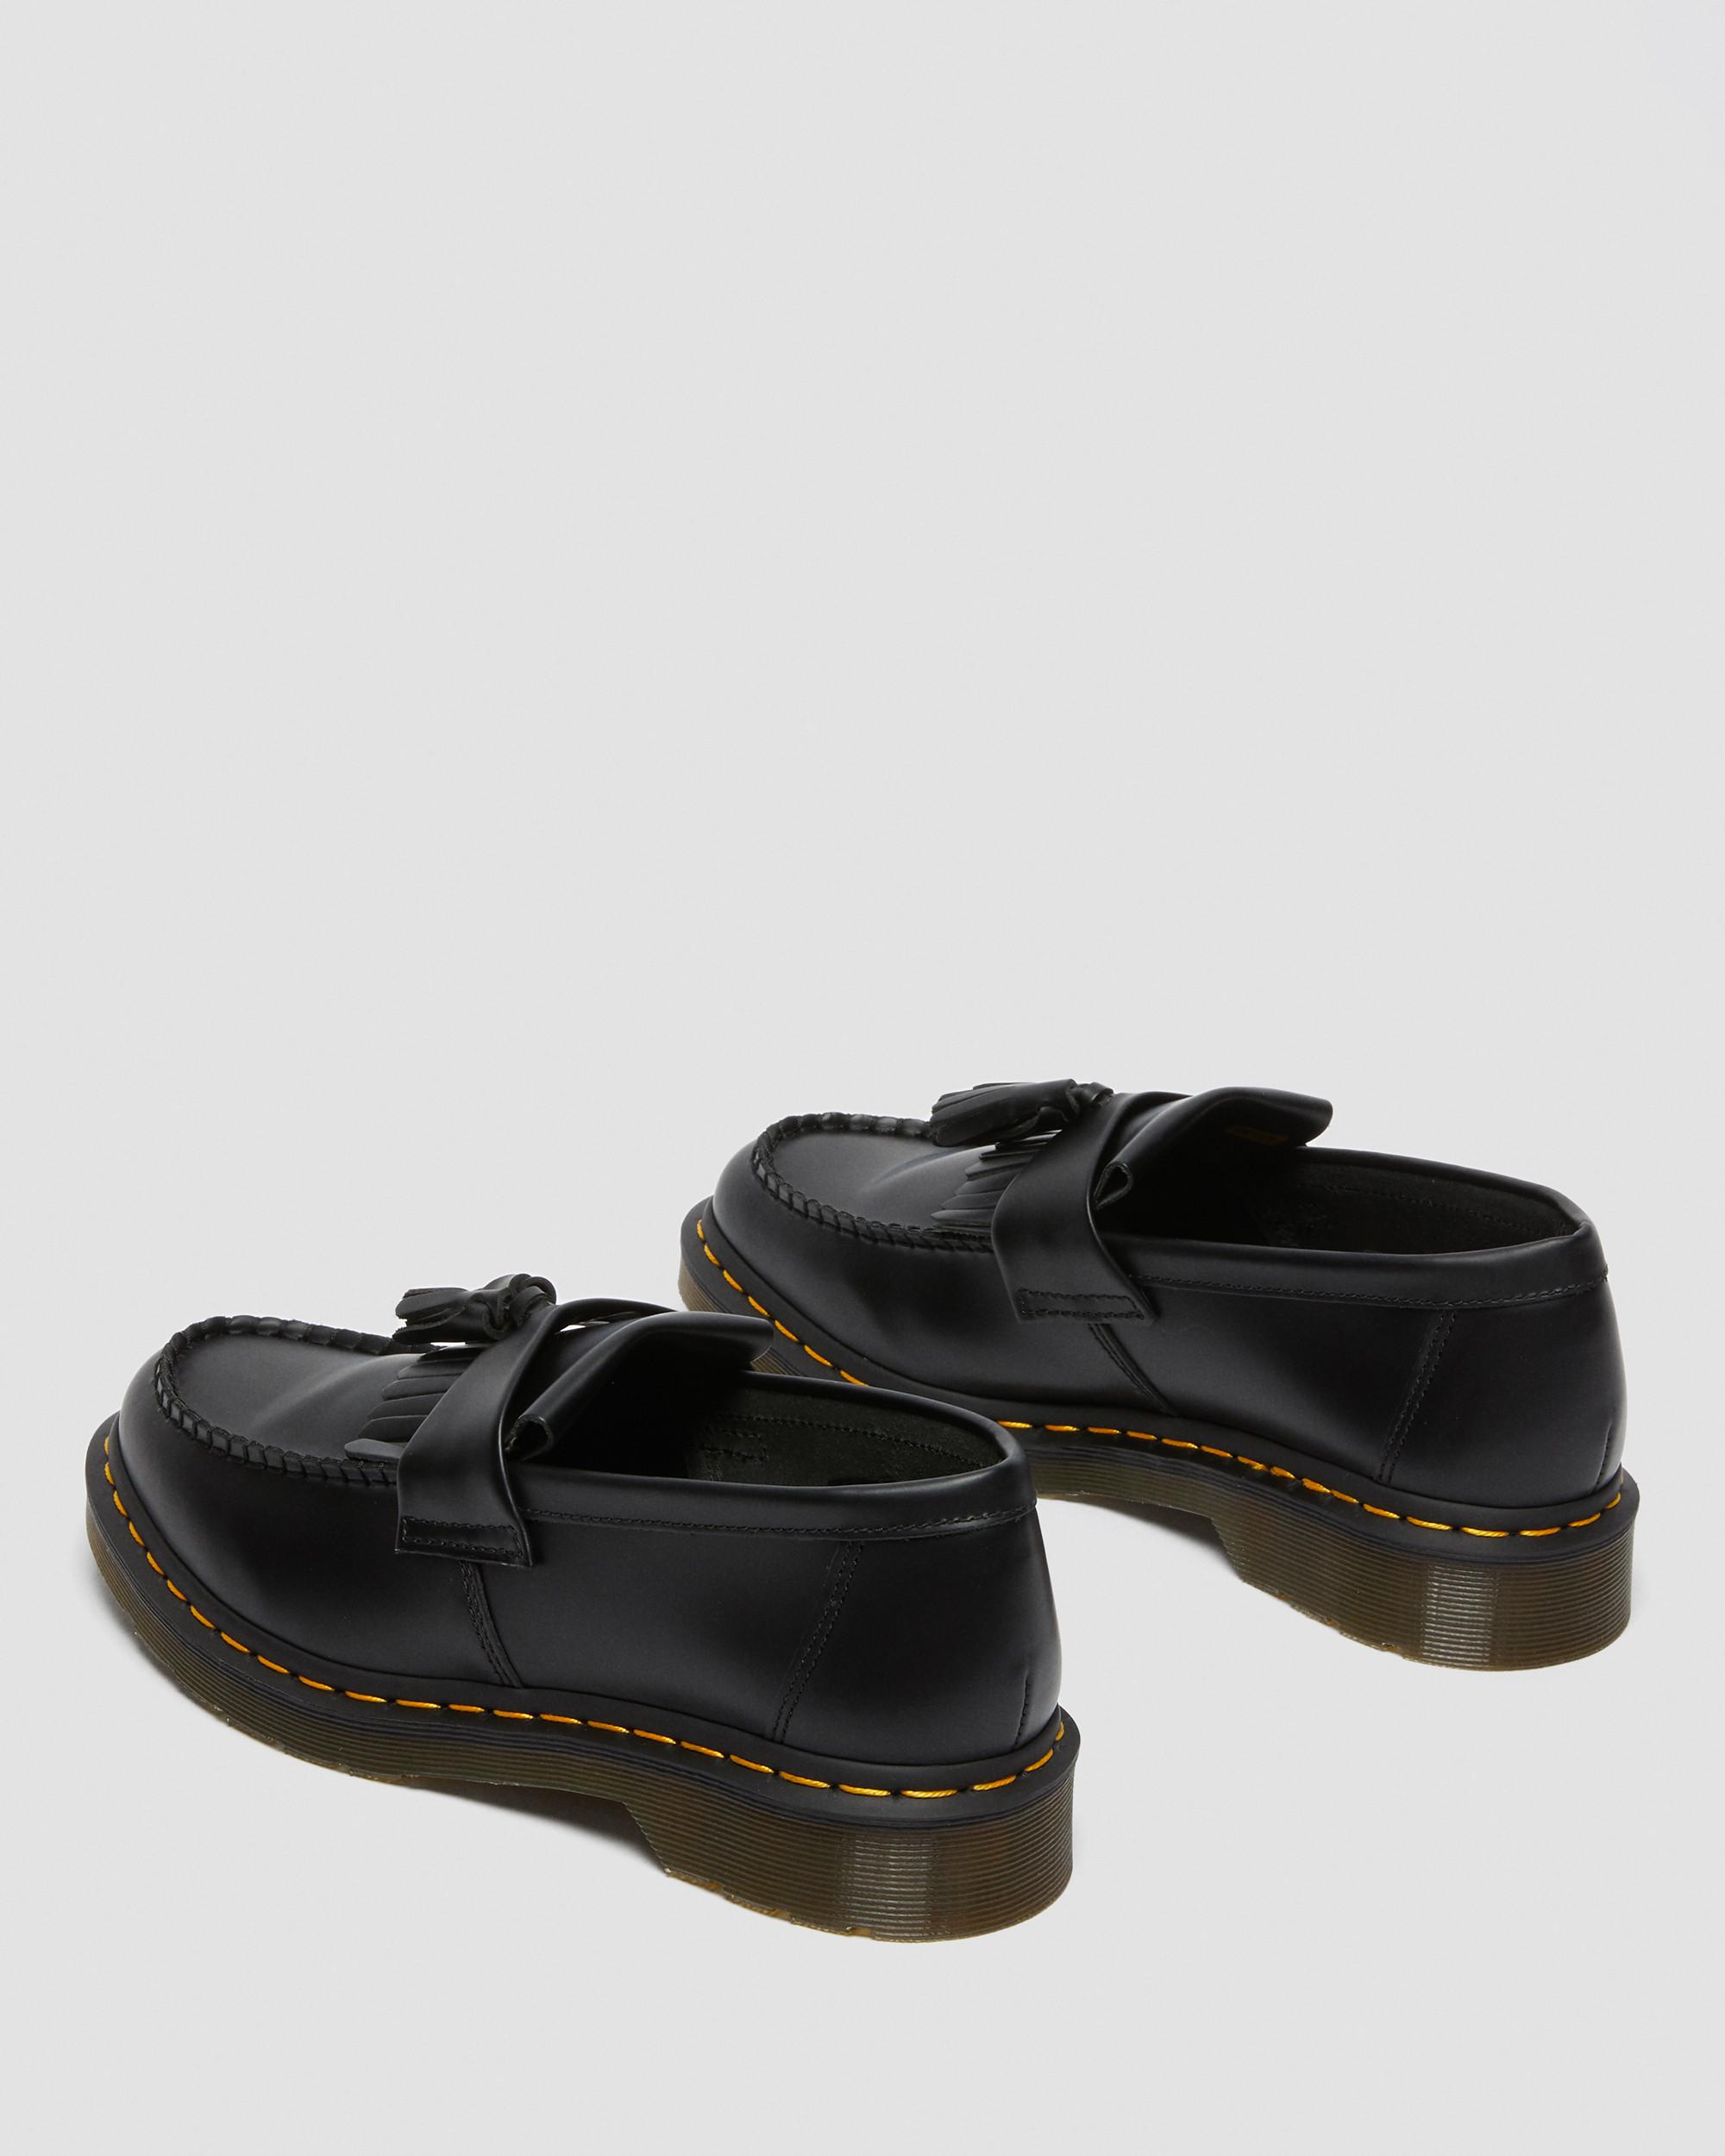 Adrian Yellow Stitch Leather Tassel Loafers in Black